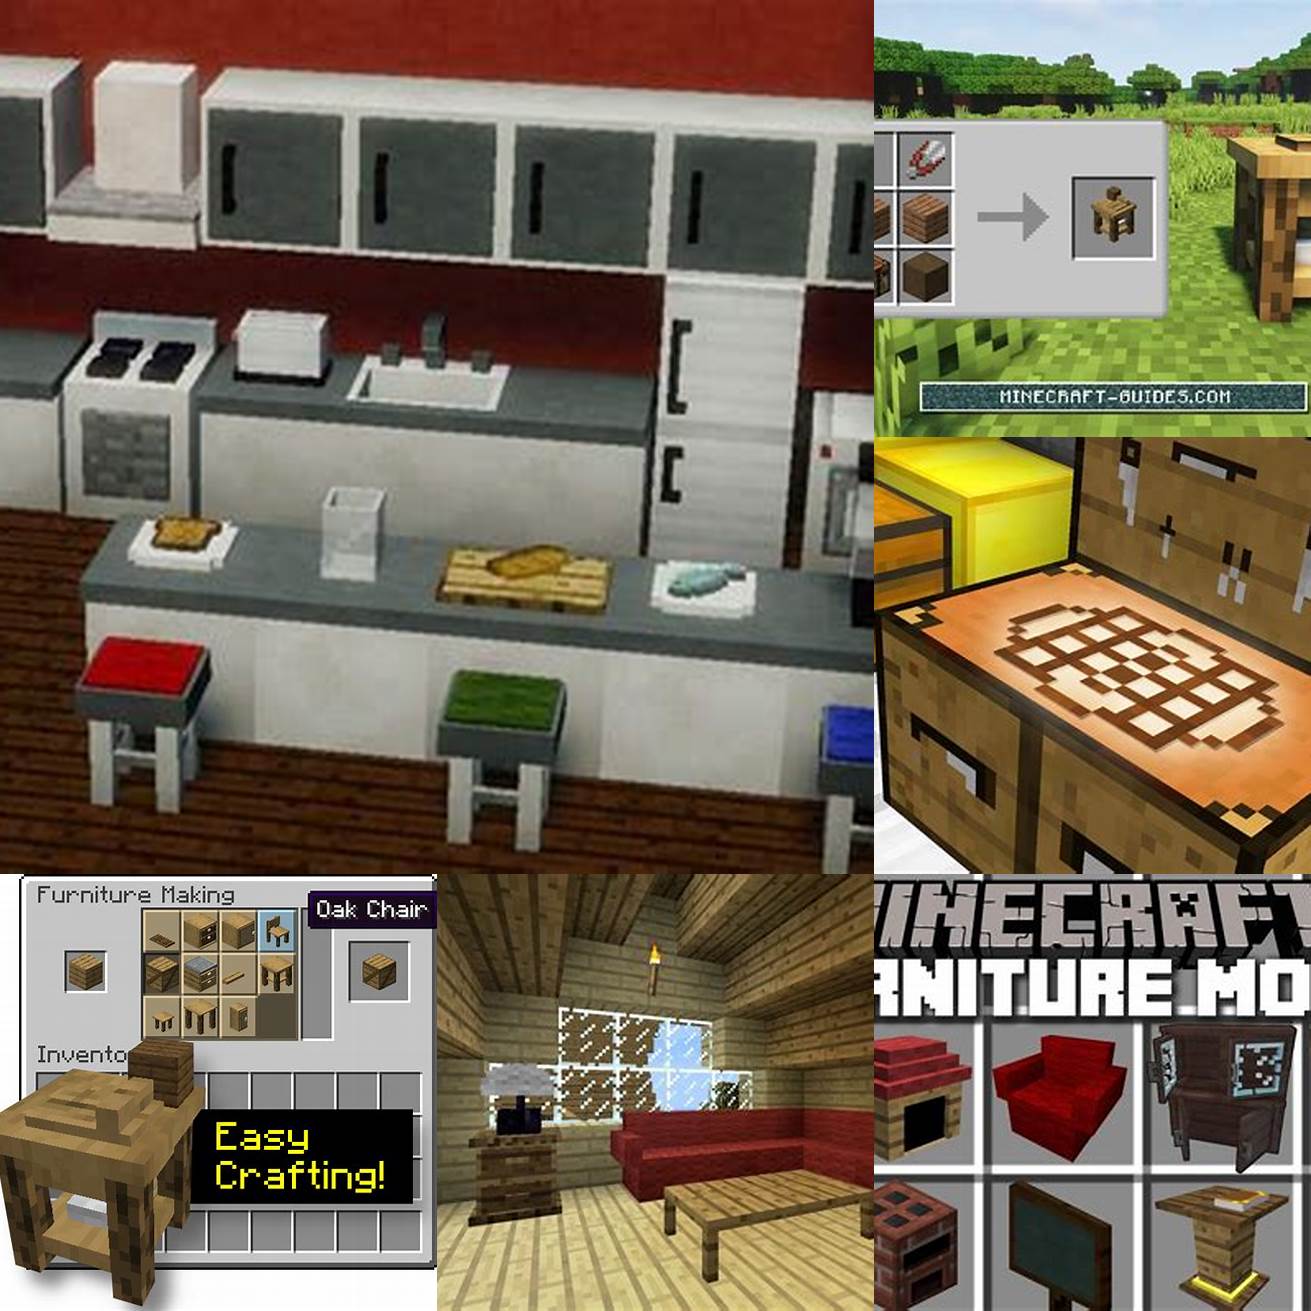 Get creative with the Minecraft Furniture Mods crafting table and workbench